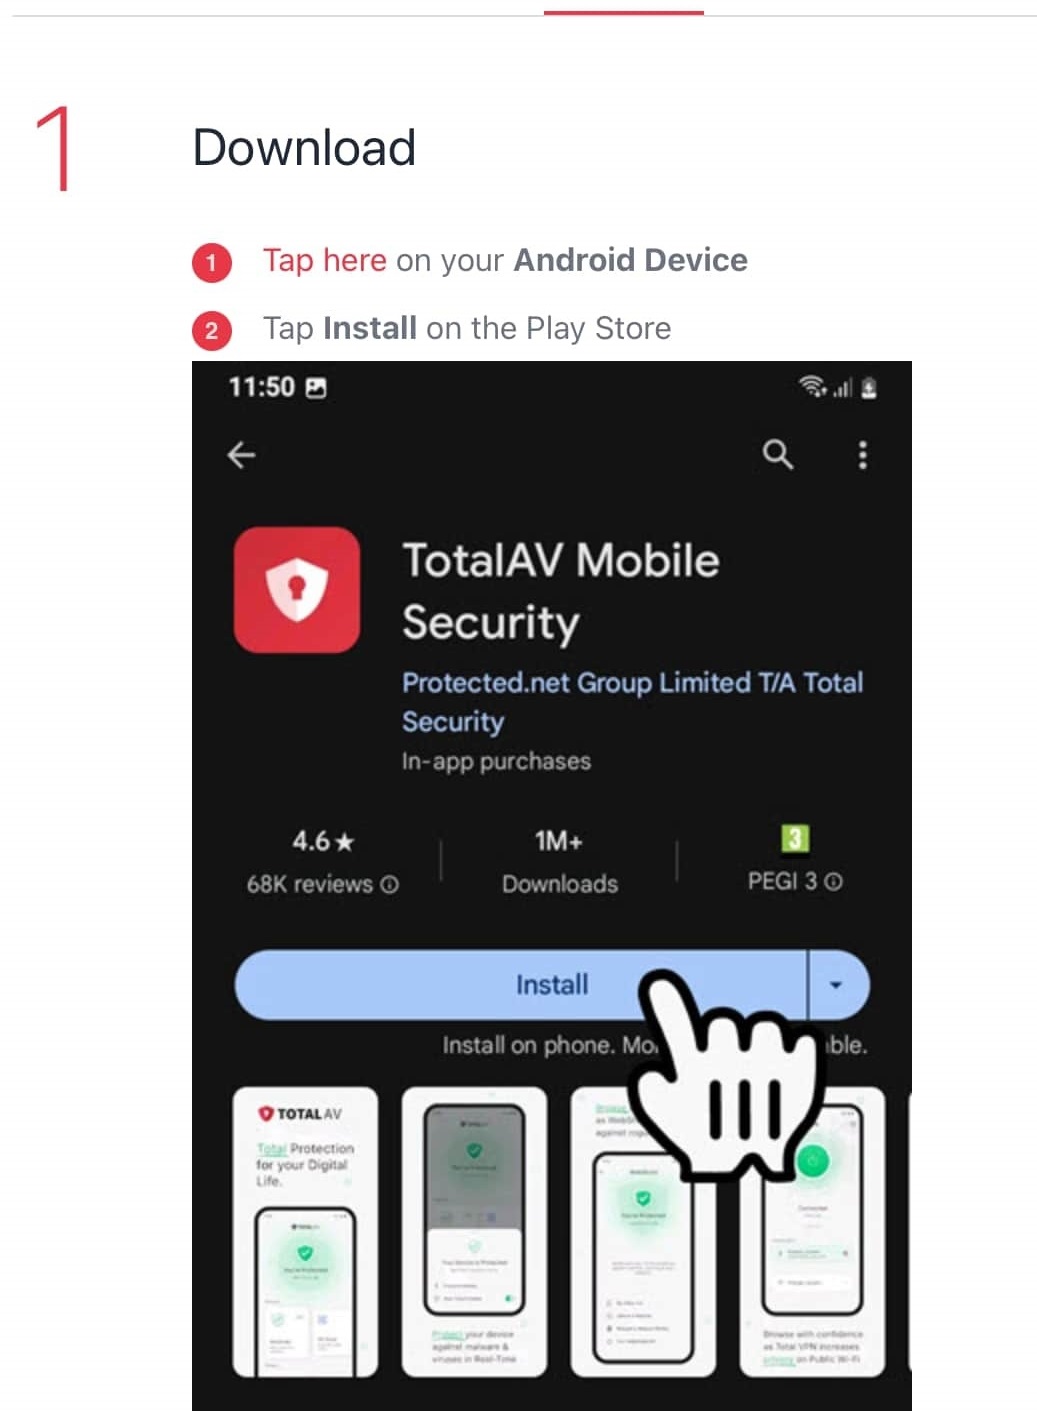 TotalAV Setup landing page with an image of the TotalAV app in the Google Play store.